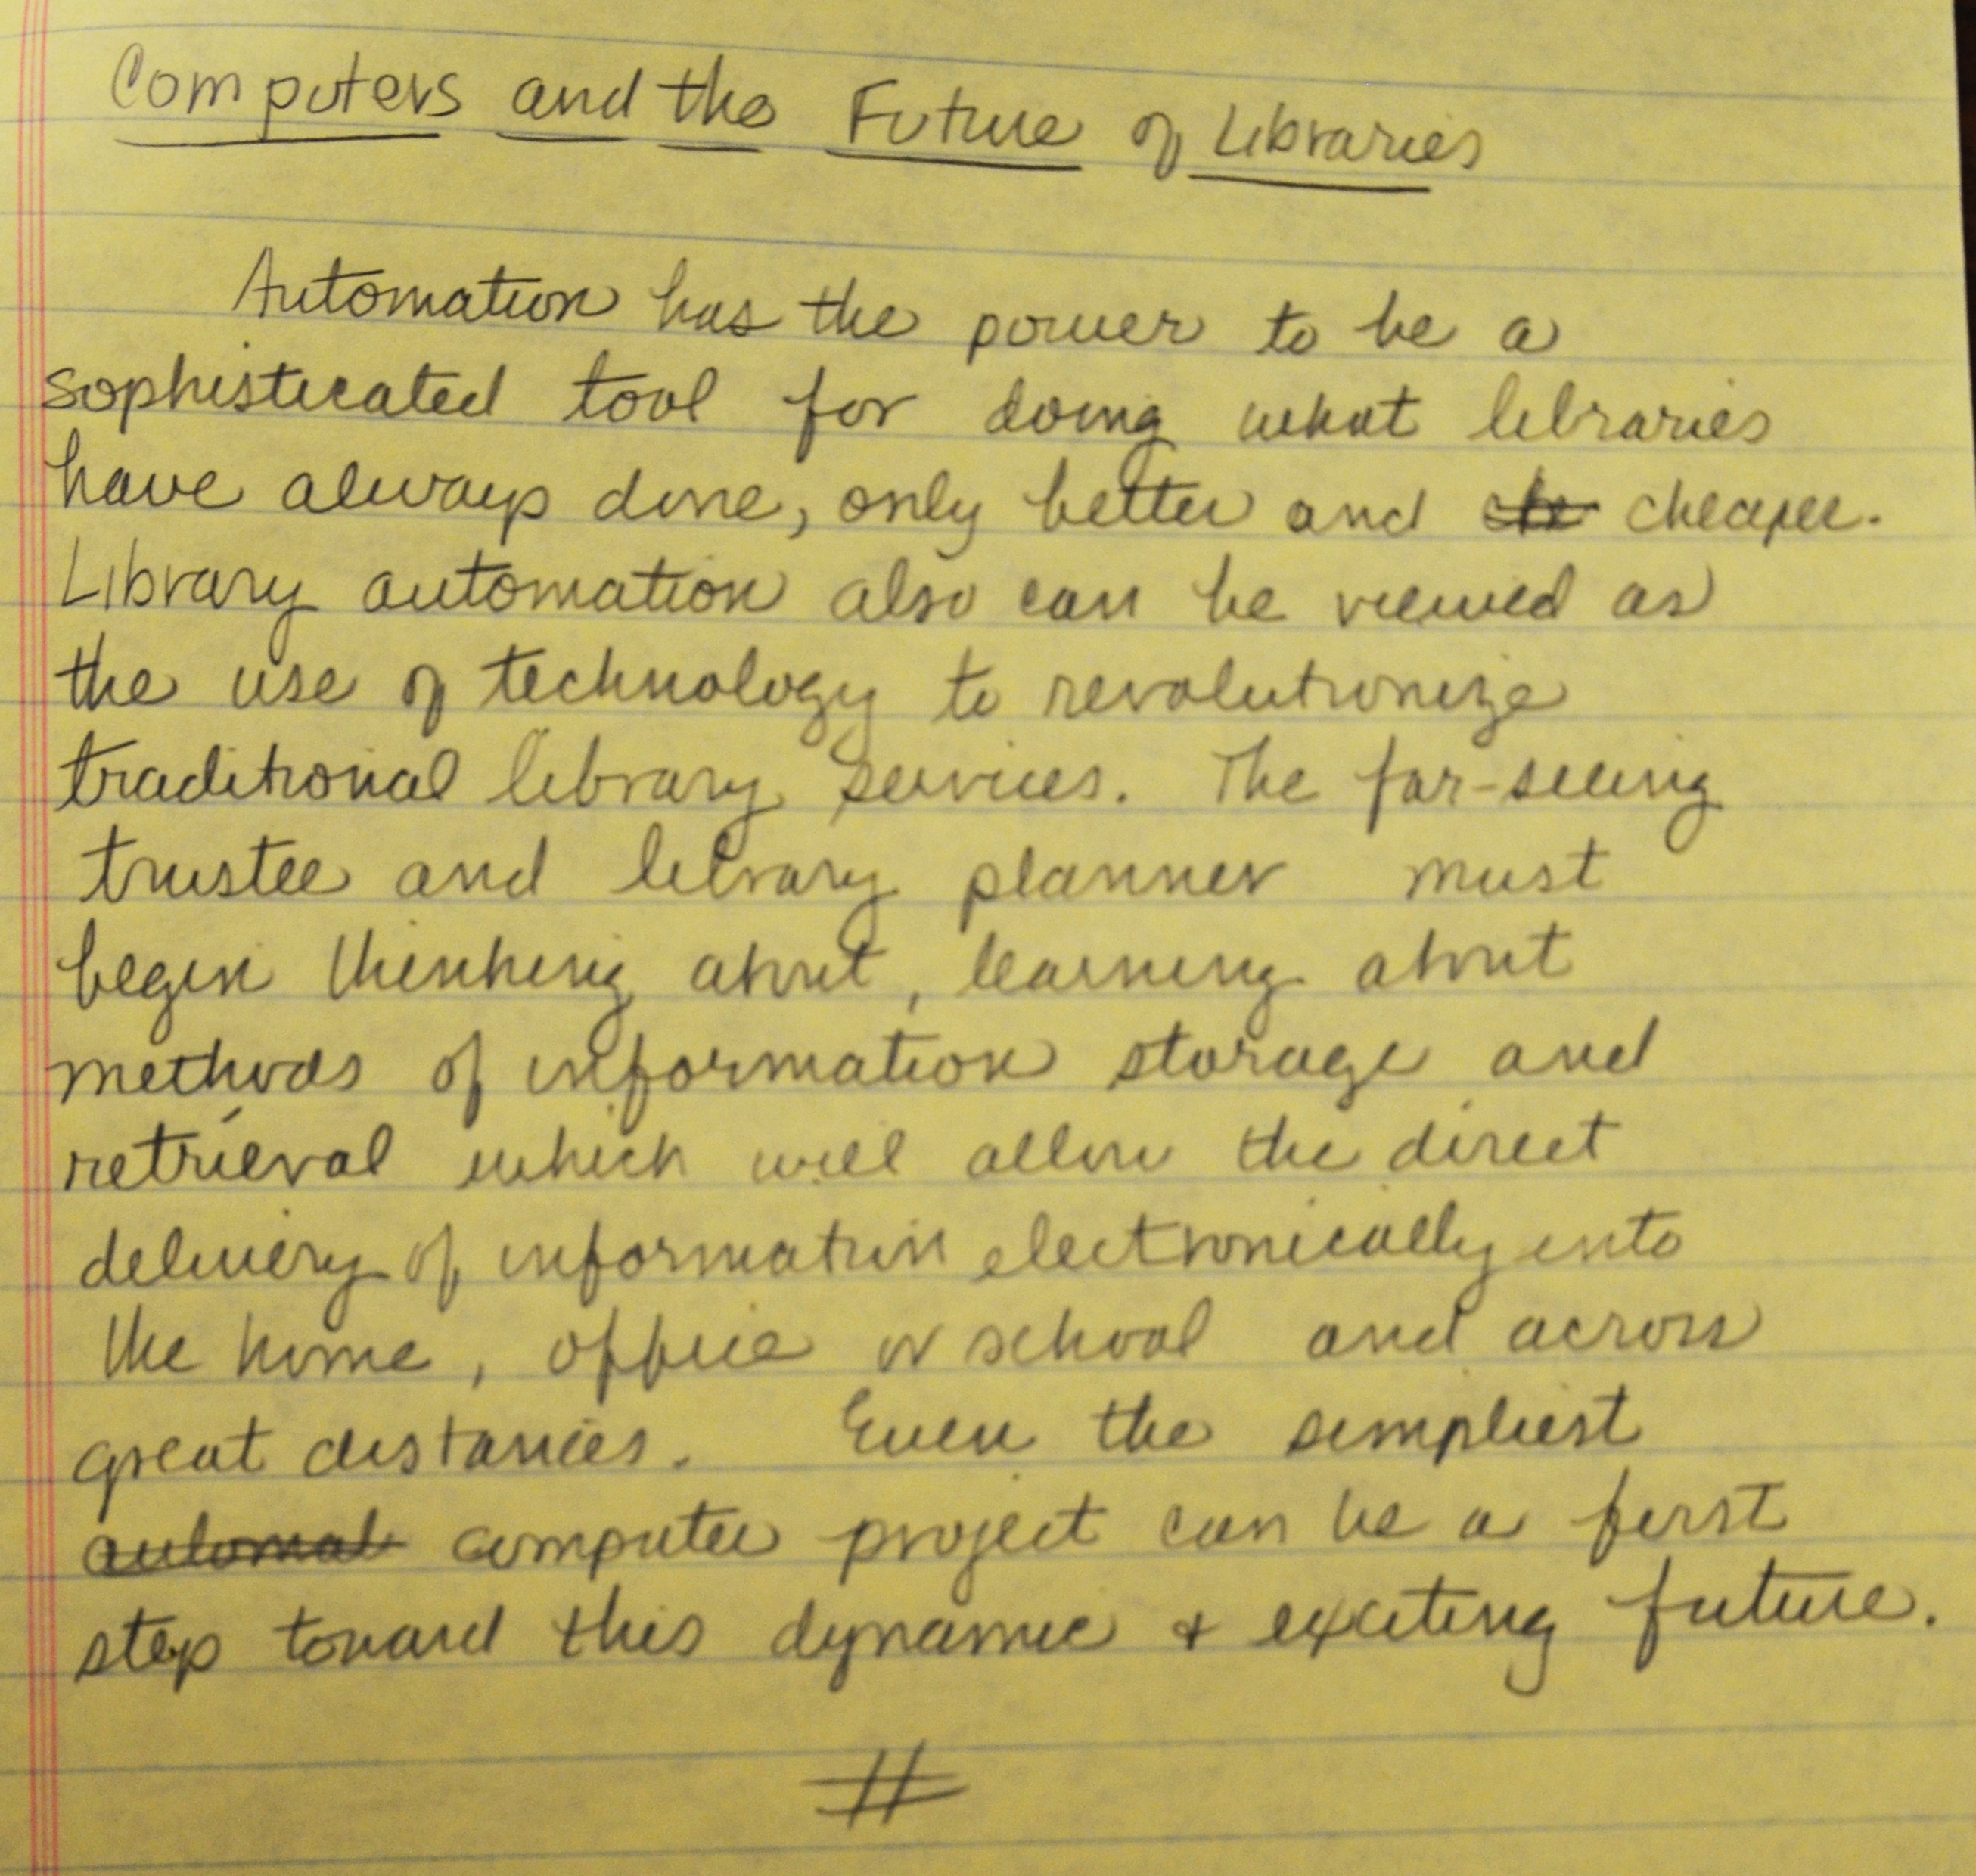 Handwritten note from Lolly - title "Computers and Future of Libraries"